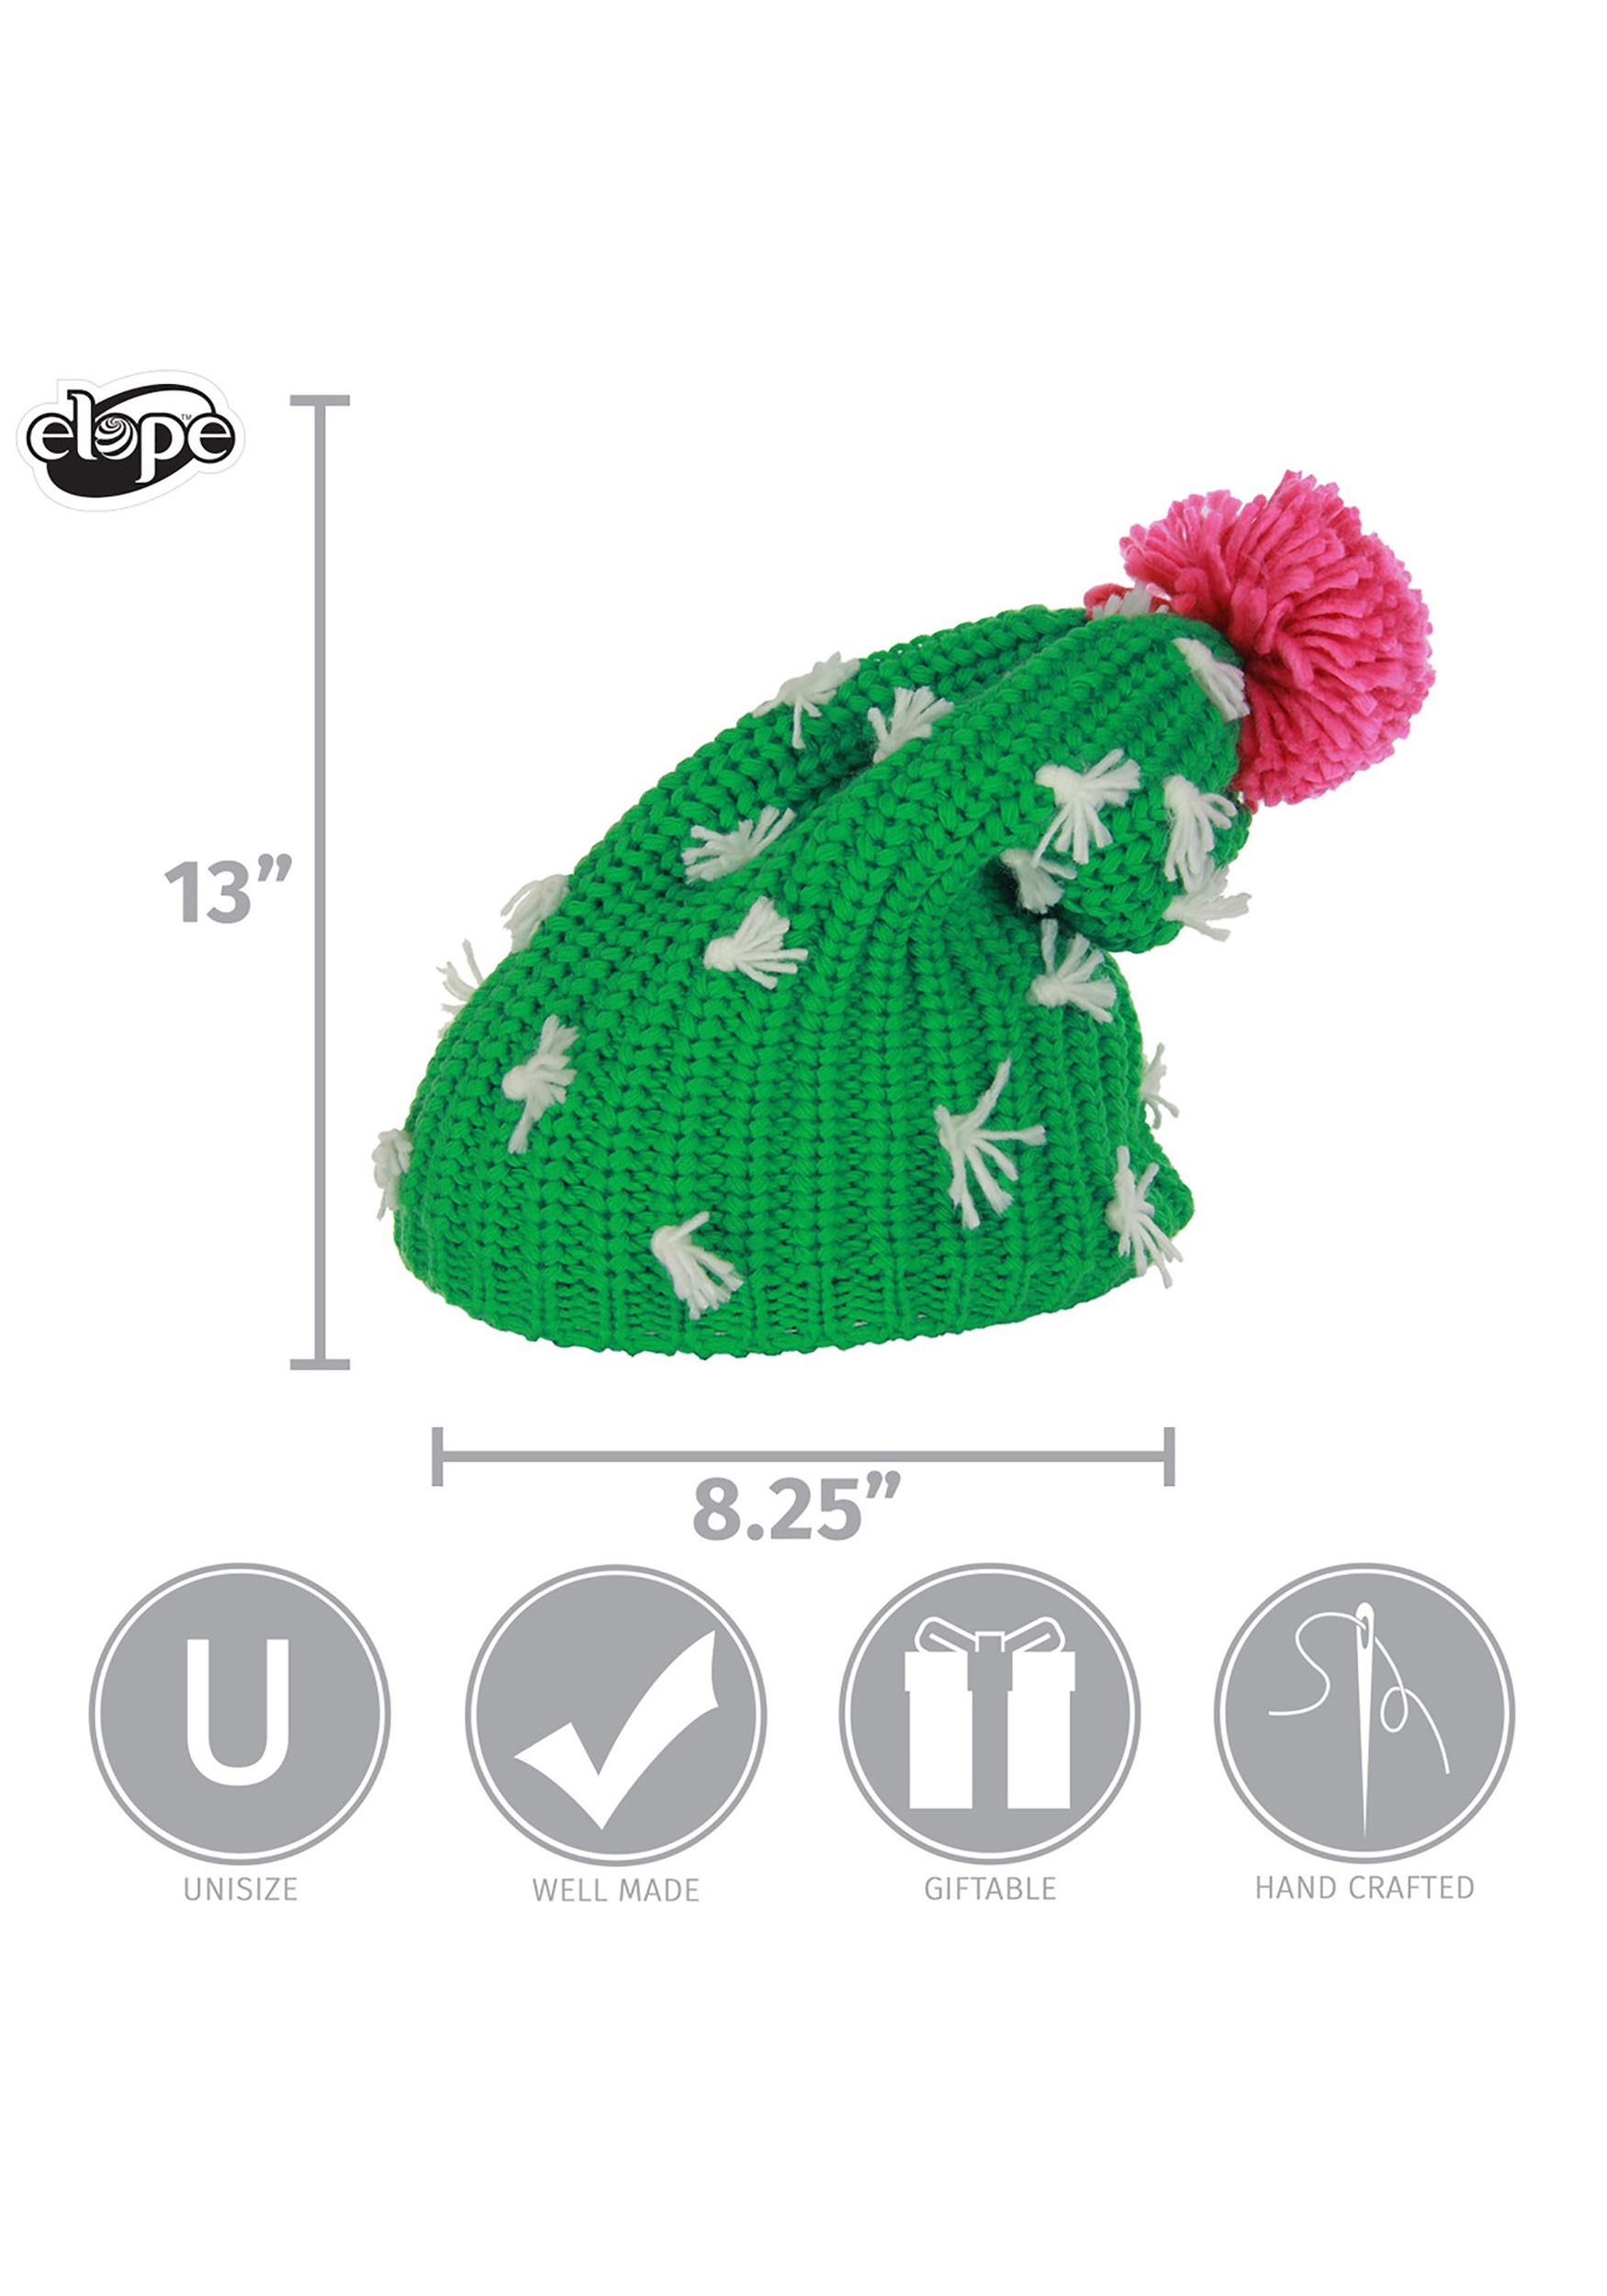 Knit Cactus Slouch Beanie